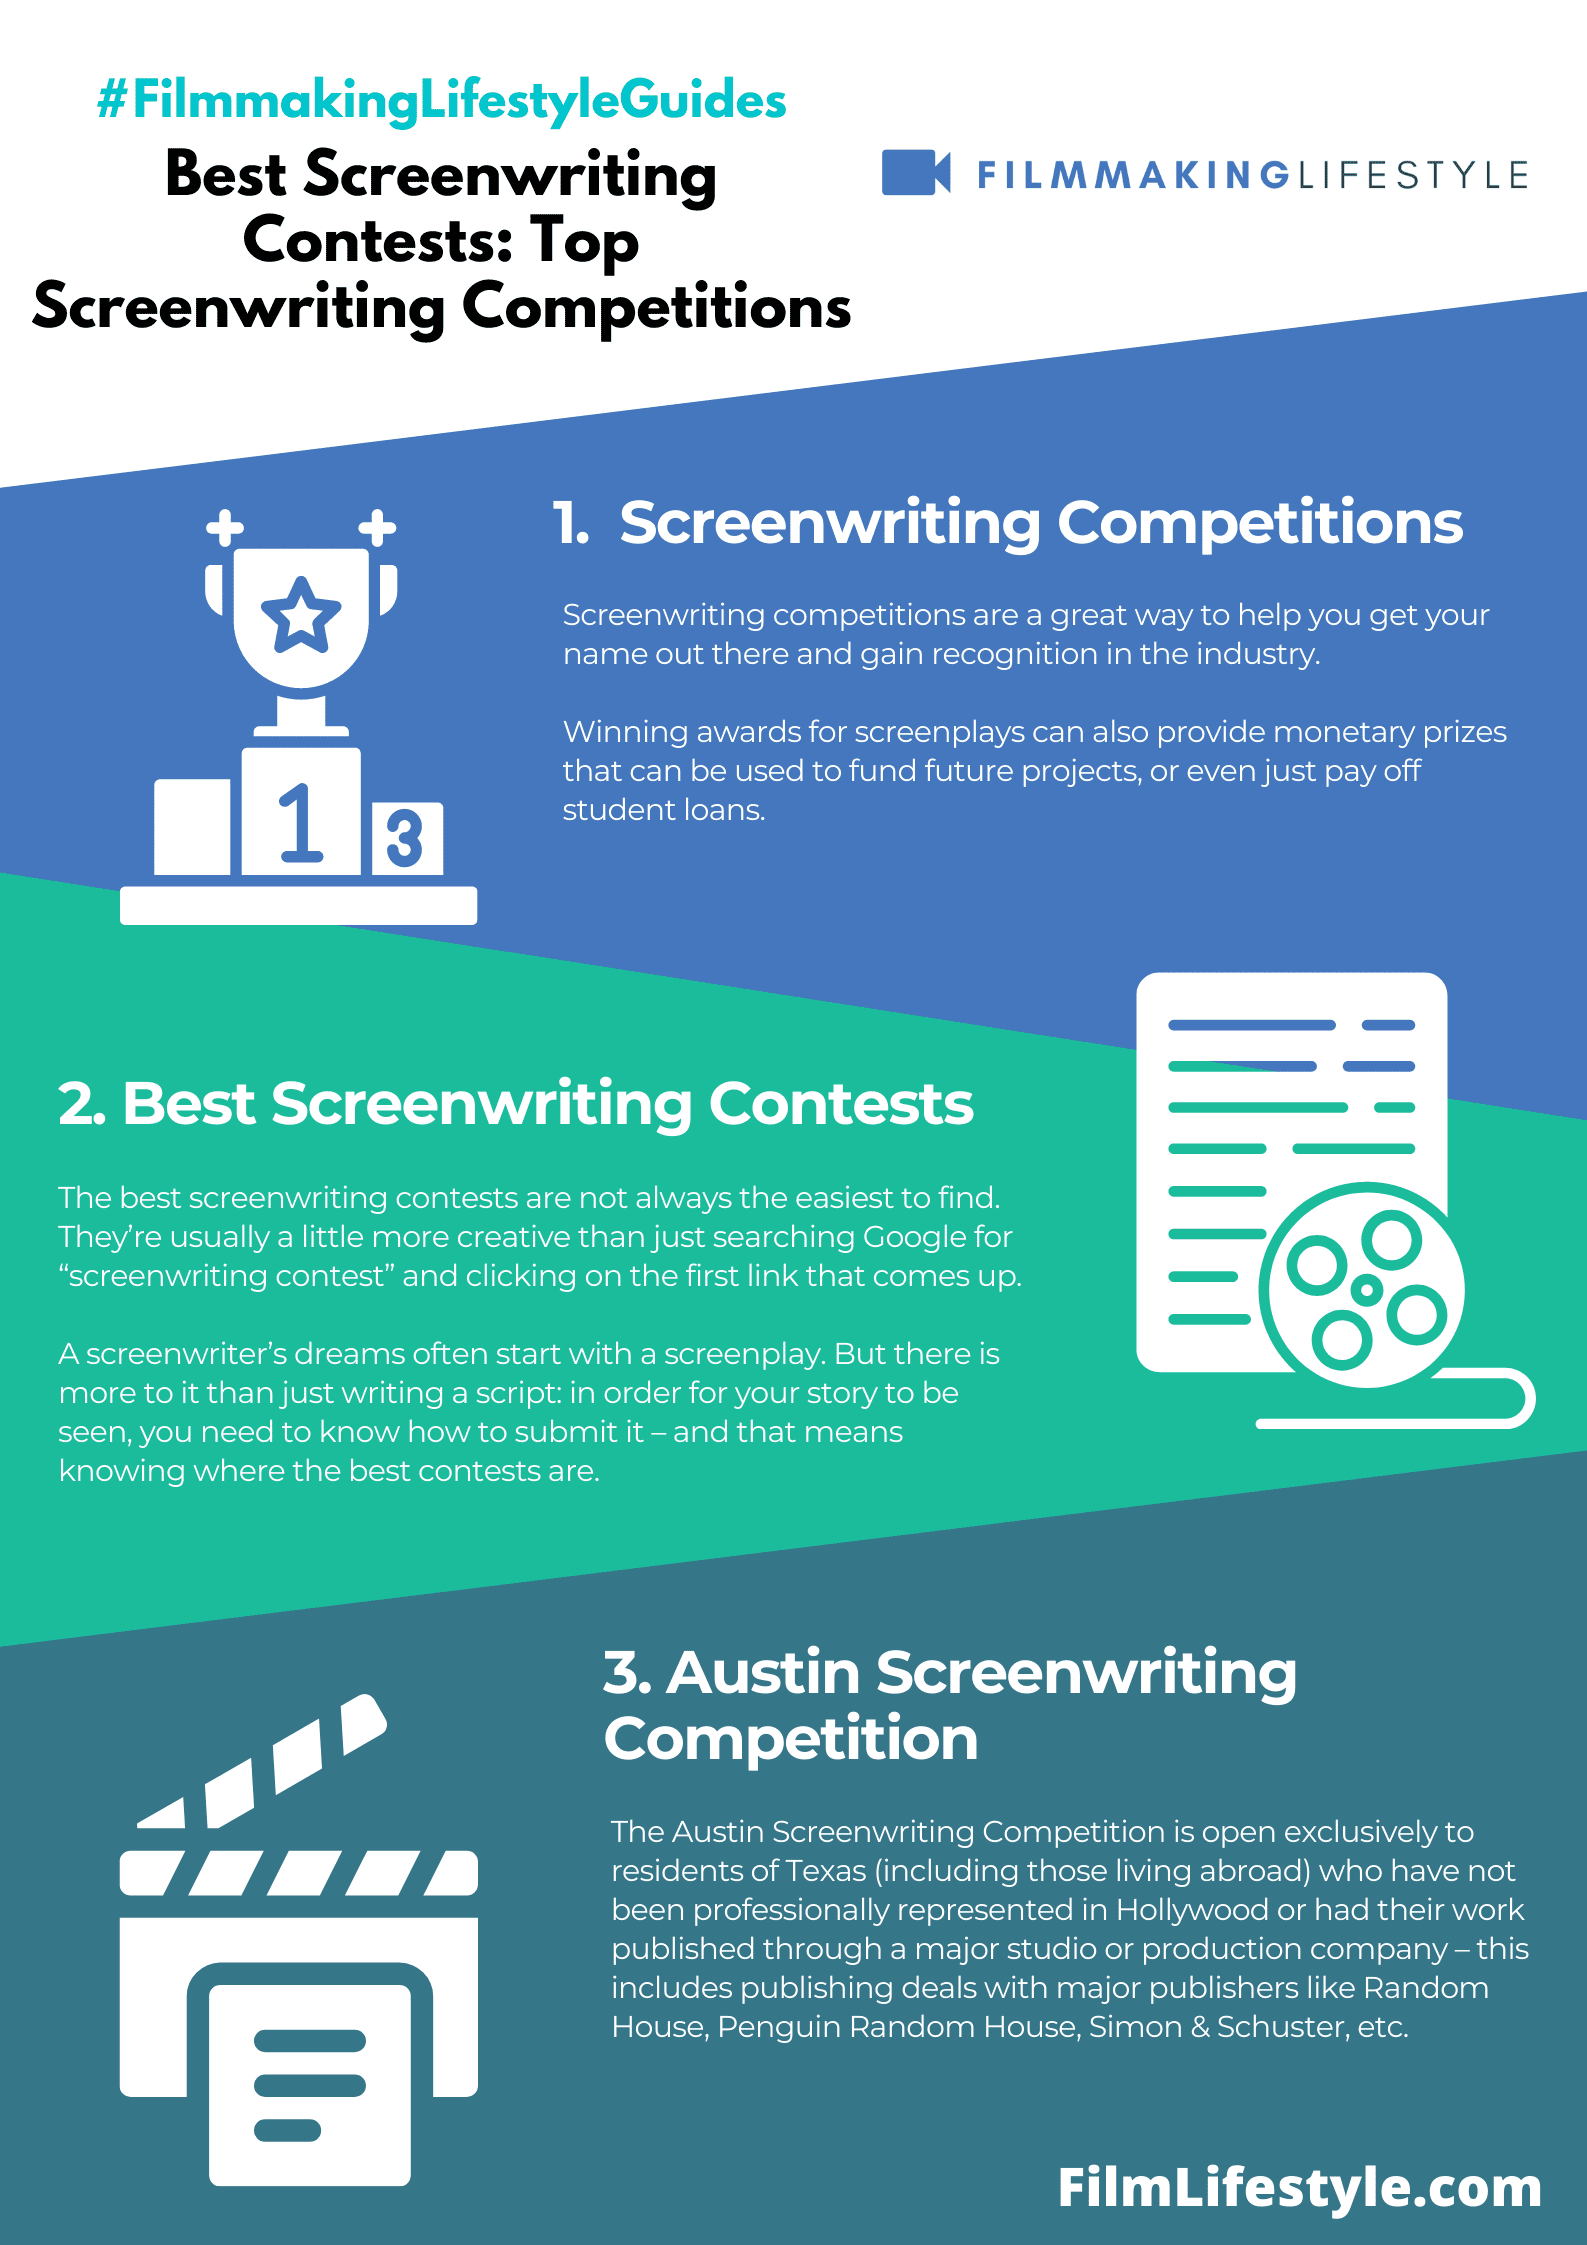 Best Screenwriting Contests